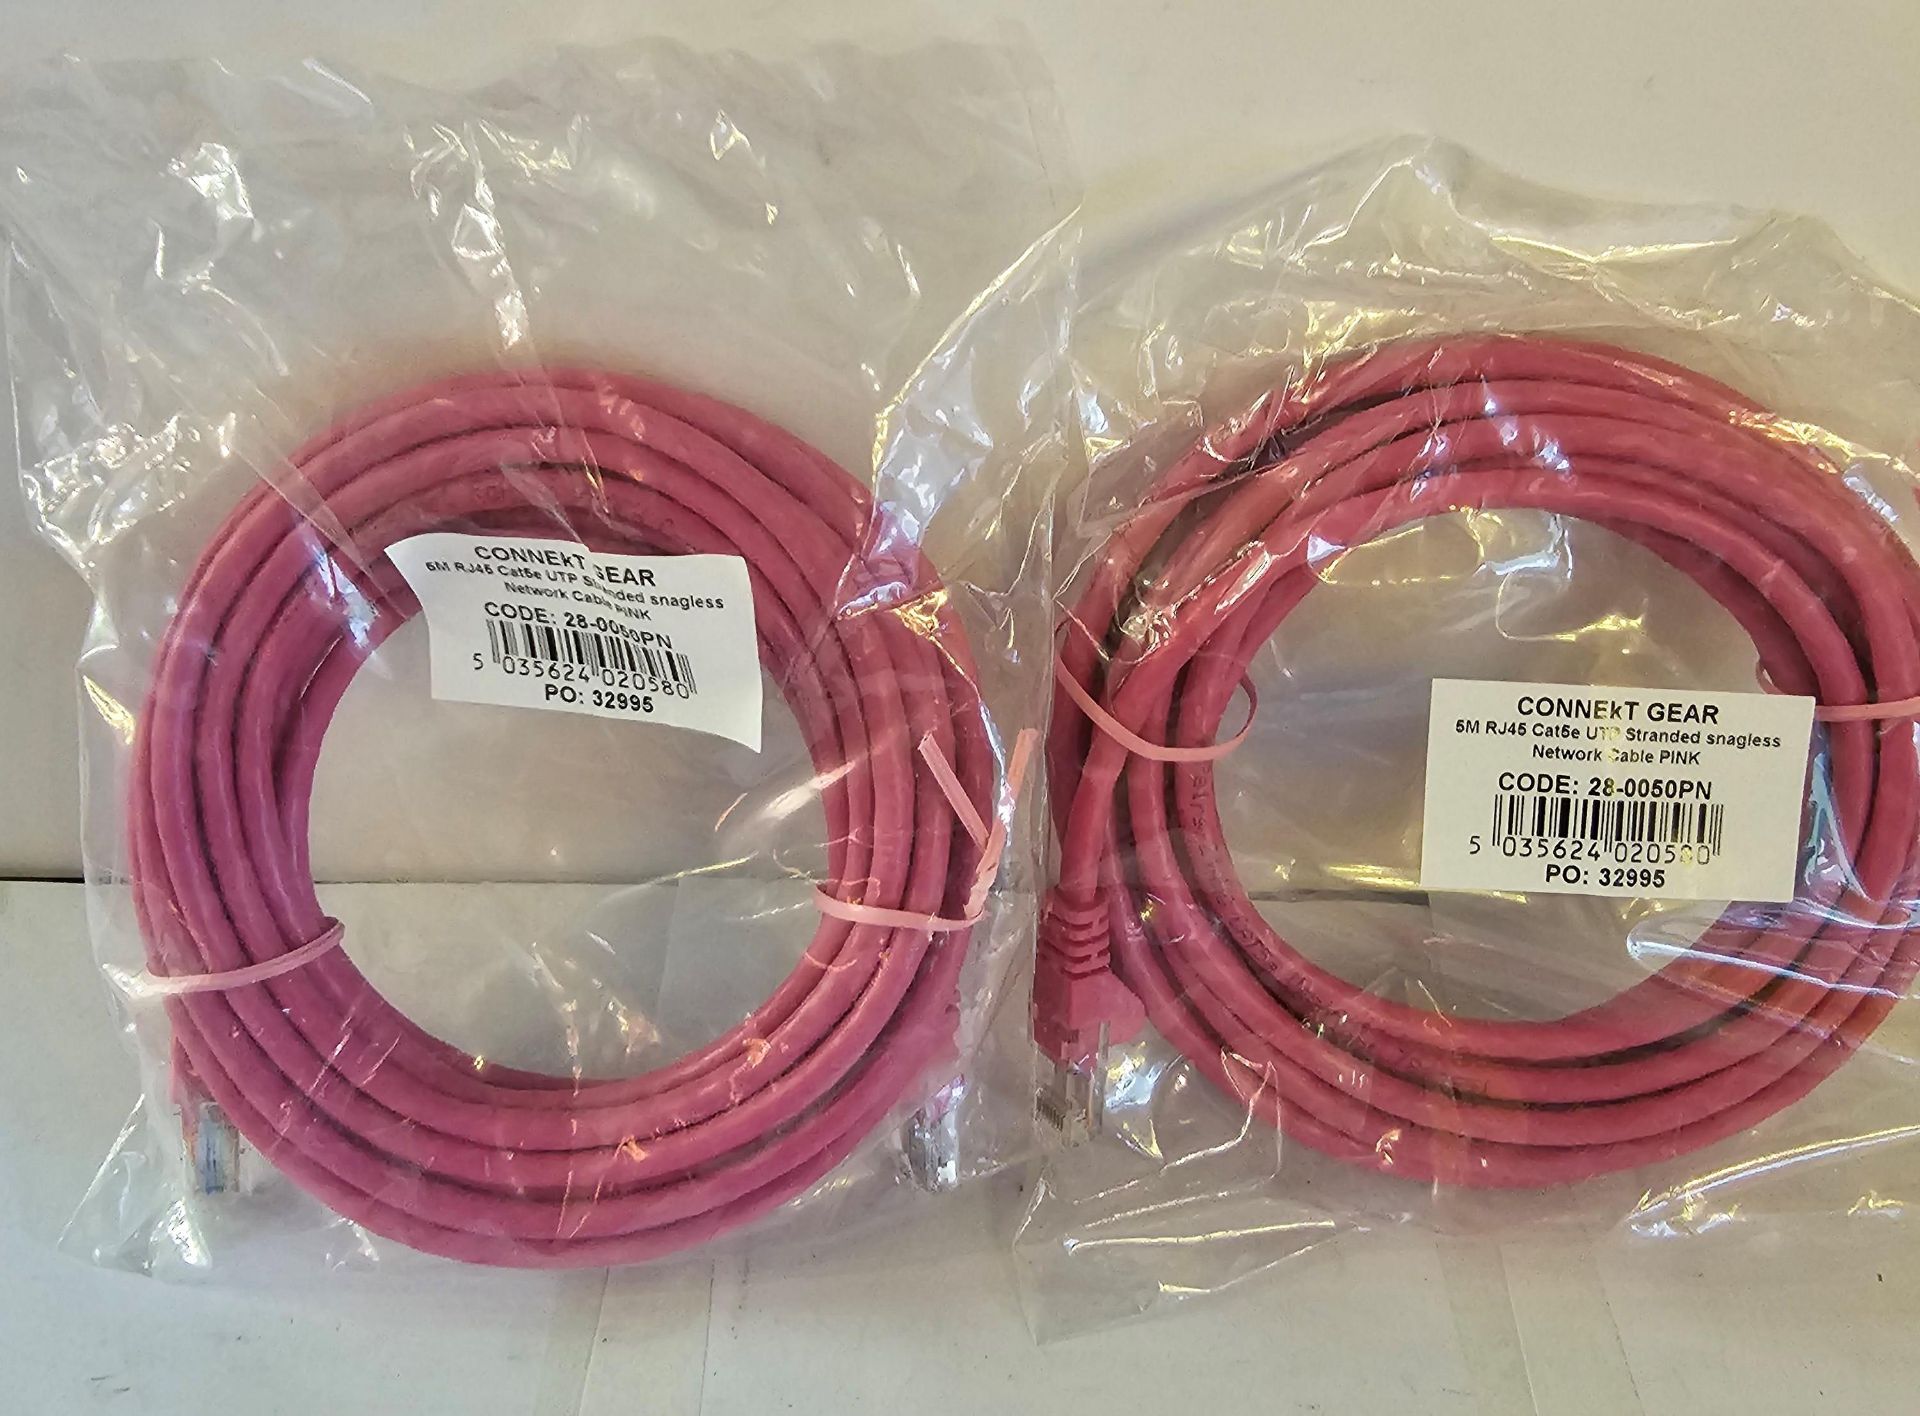 46 CAT 5E 5MTR PATCH CABLE IN PINK RJ45 UTP NETWORK CABLE